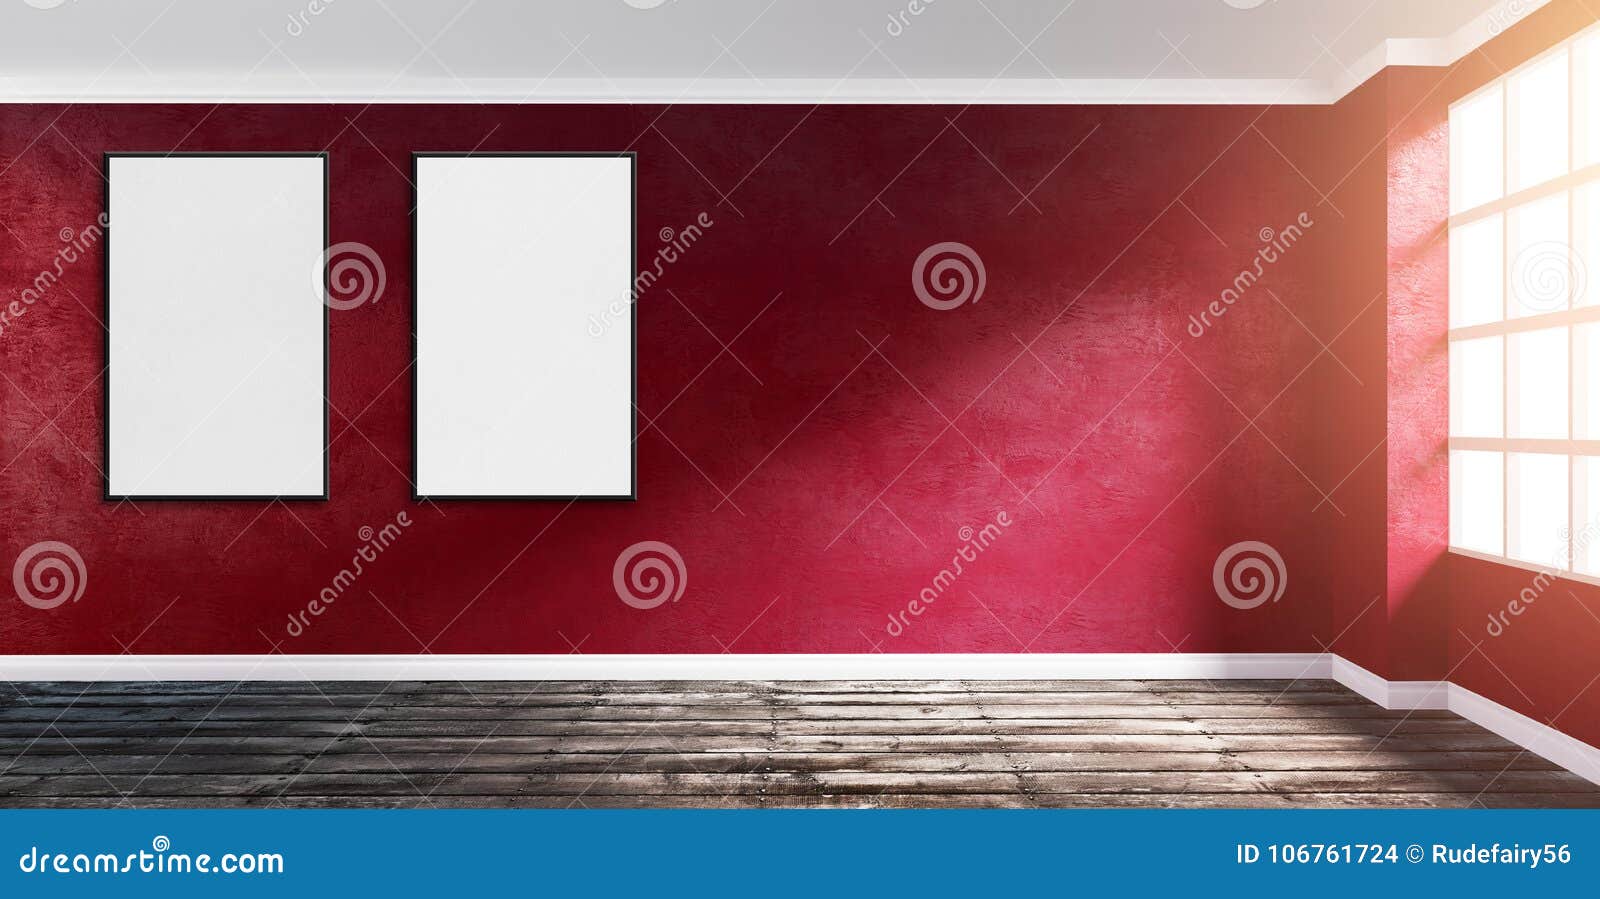 Room Corner With Ruby Red Plaster Wall With Poster Mock Up Stock Illustration Illustration Of Isolated Bright 106761724